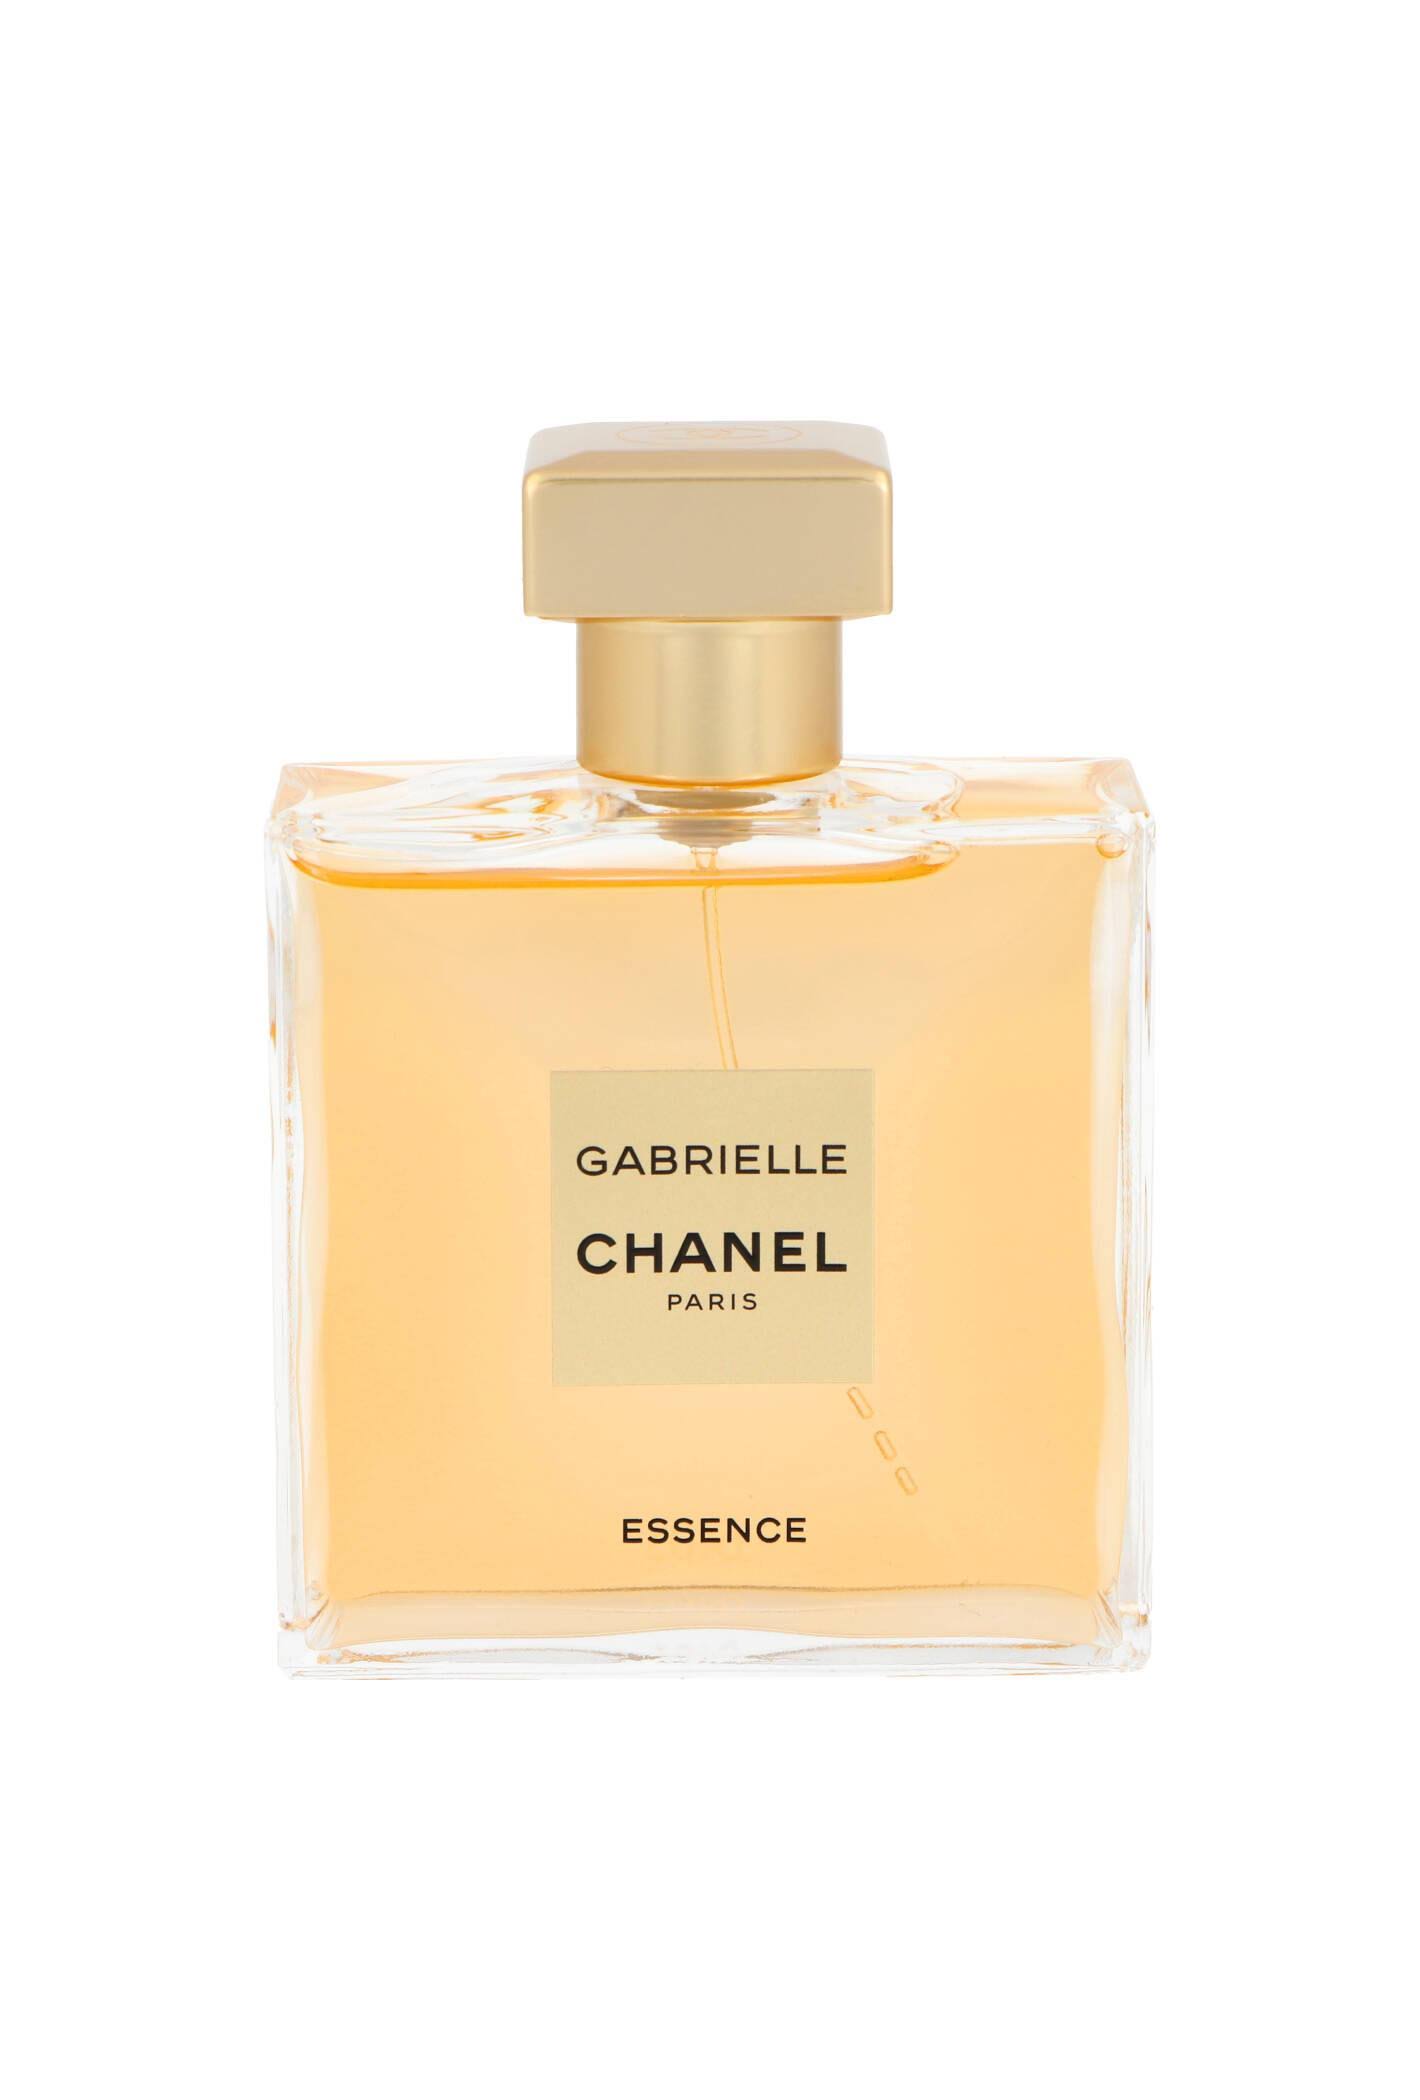 Chanel - Gabrielle Essence by Chanel Eau De Parfum Spray, 35ml for  PHP5,150.00 available at Shoppable Philippines B2B Marketplace